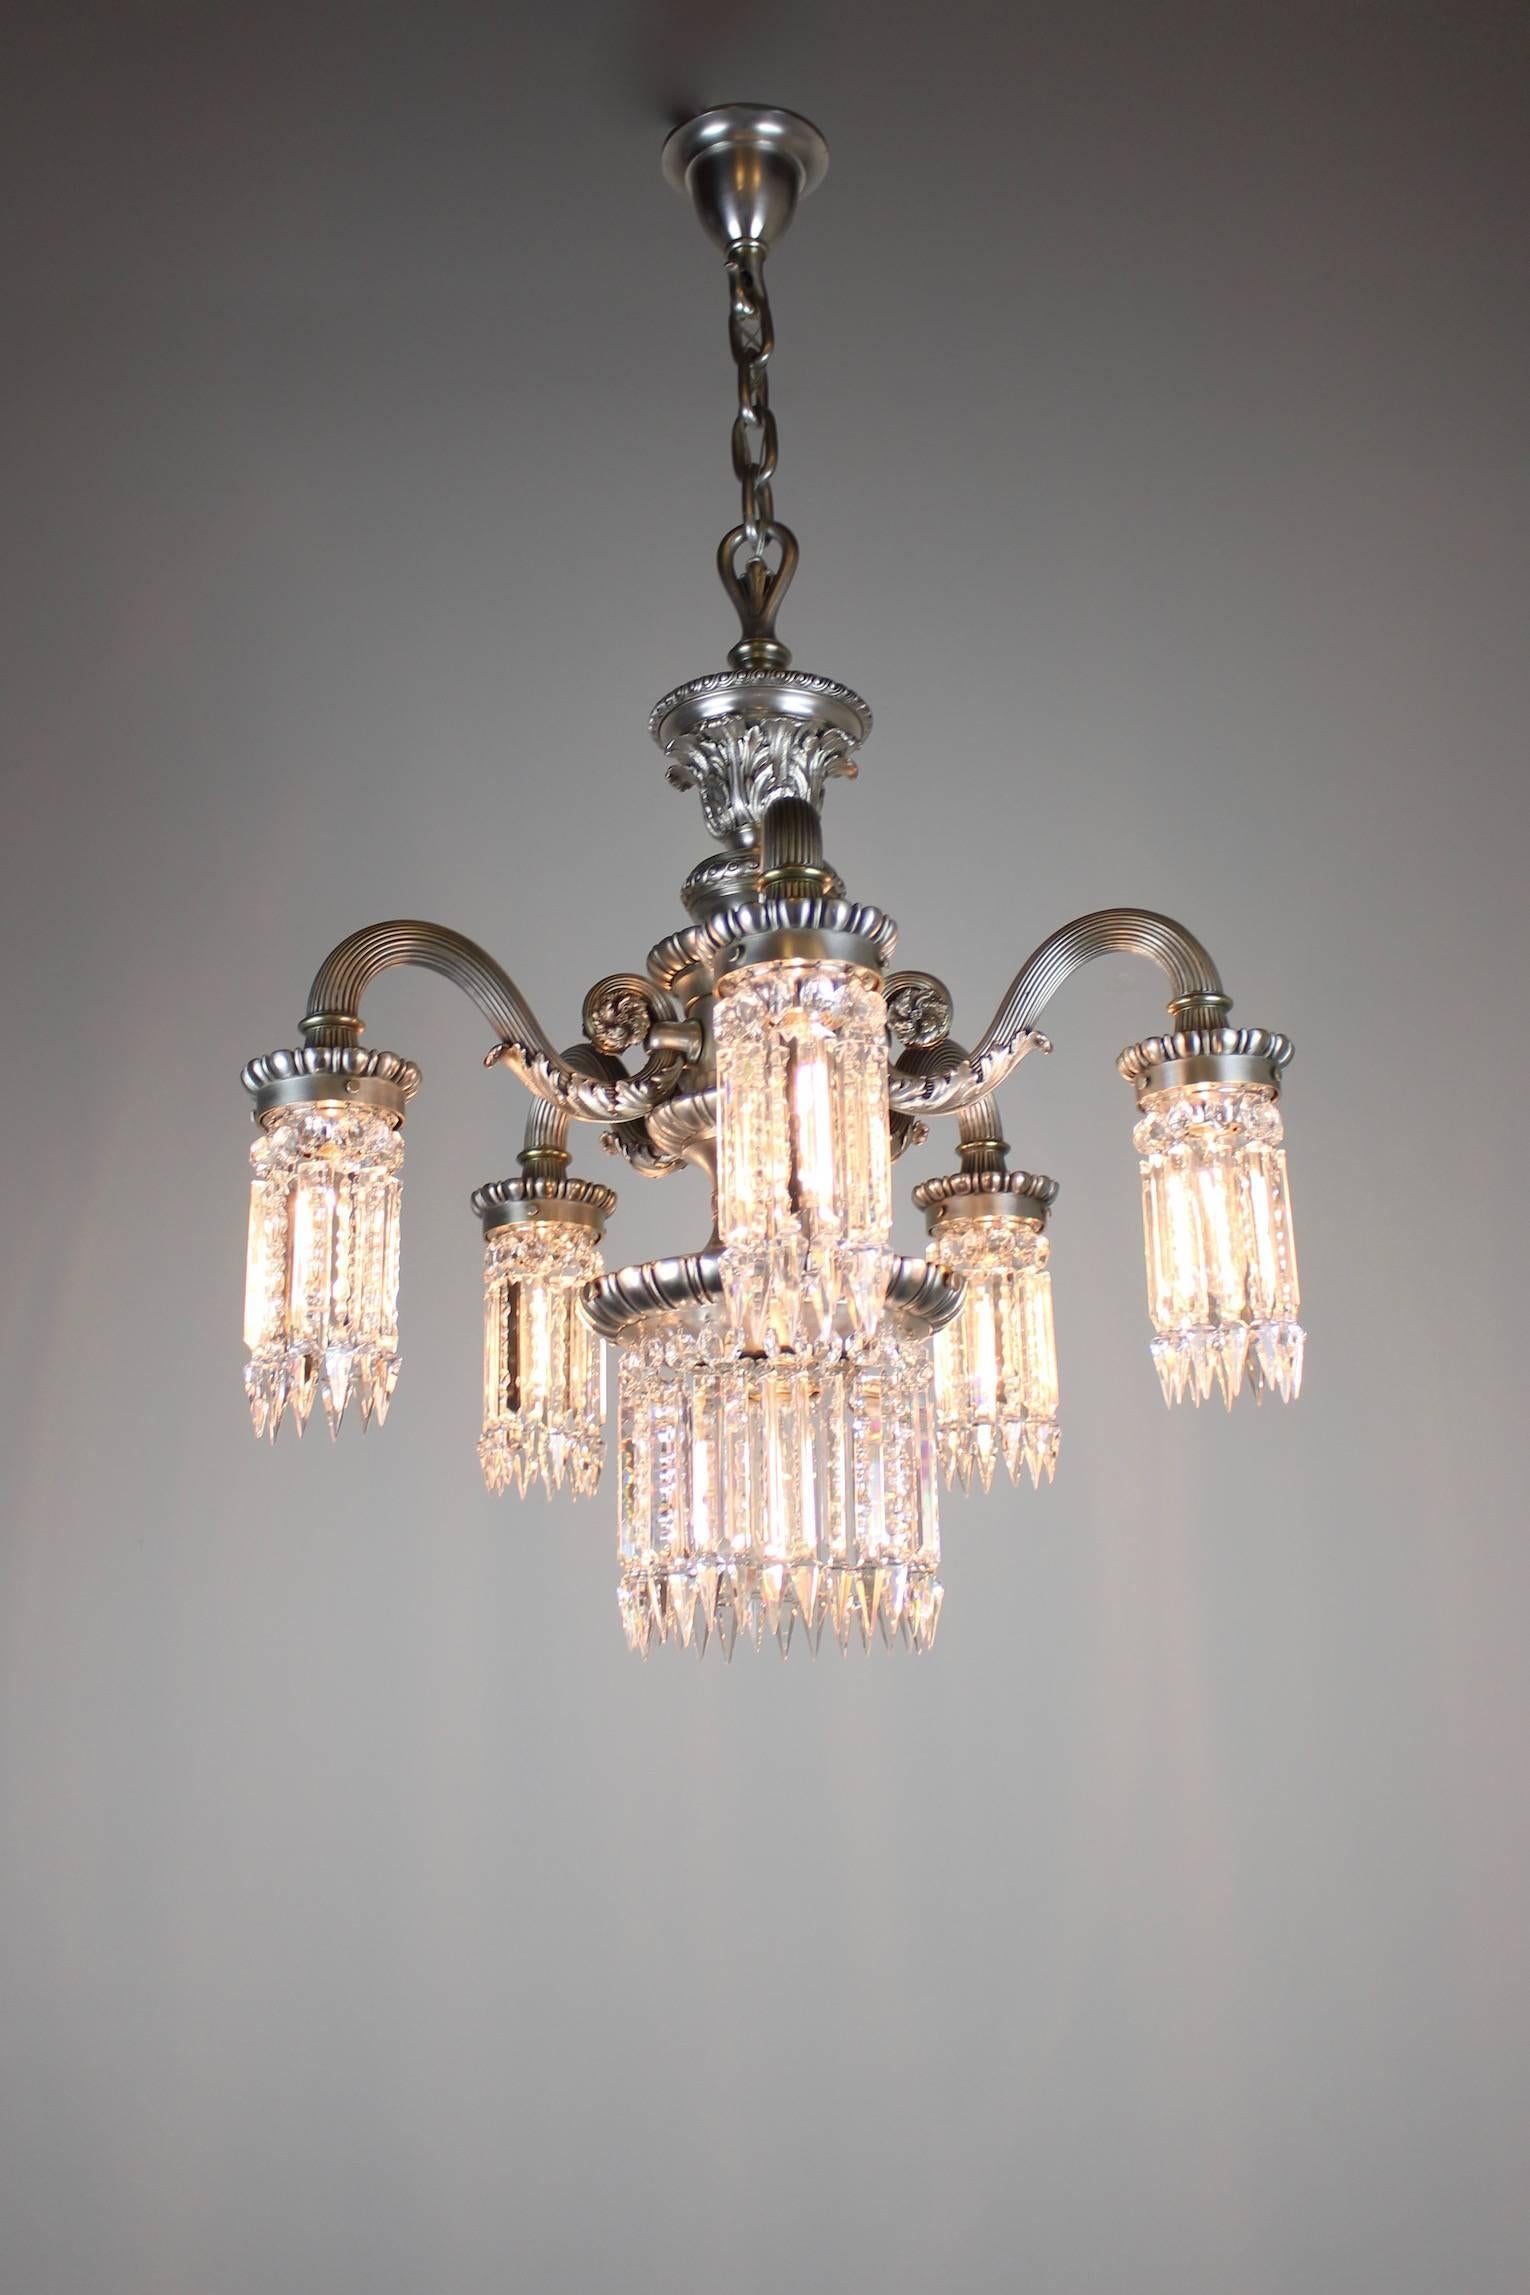 This is a hearty and gorgeous neoclassical style chandelier, with five arms and a wide centre light, circa 1910. This fixture boasts the best of neoclassical design motifs with reeded arms and acanthus leaf castings. An excellent choice for a hearty